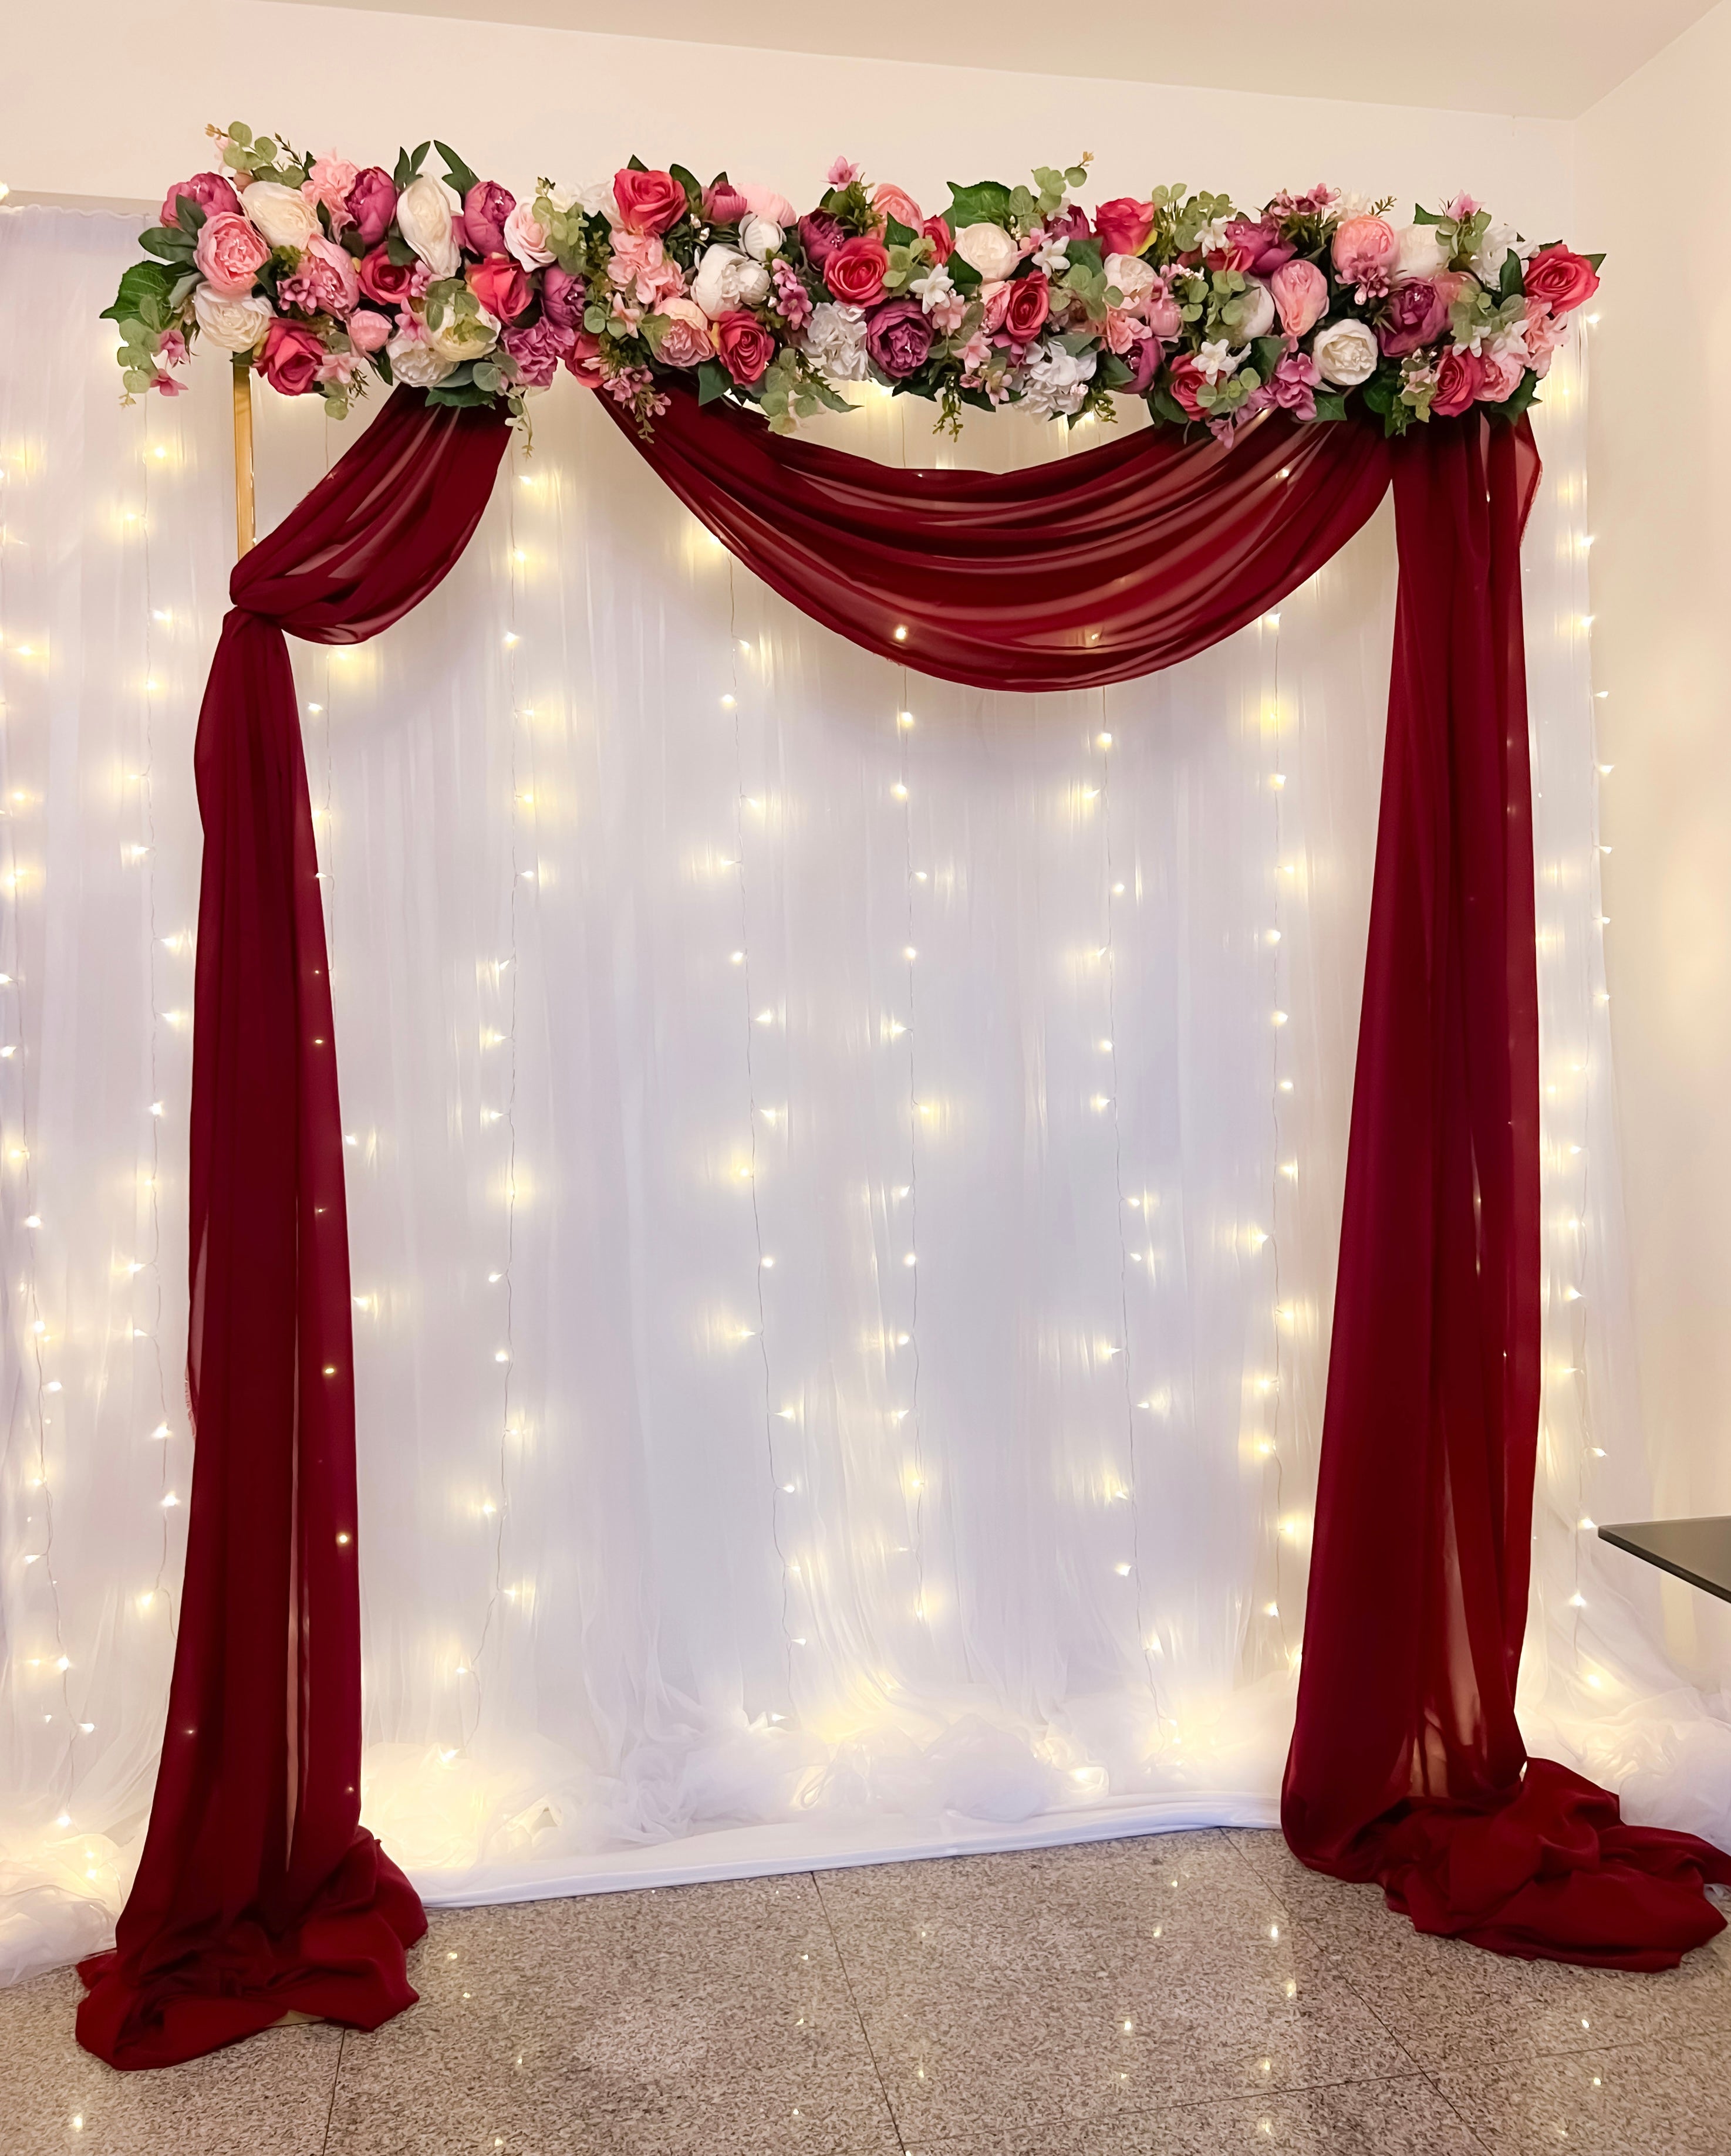 Basic Floral Arch with Fairy-light Backdrop II